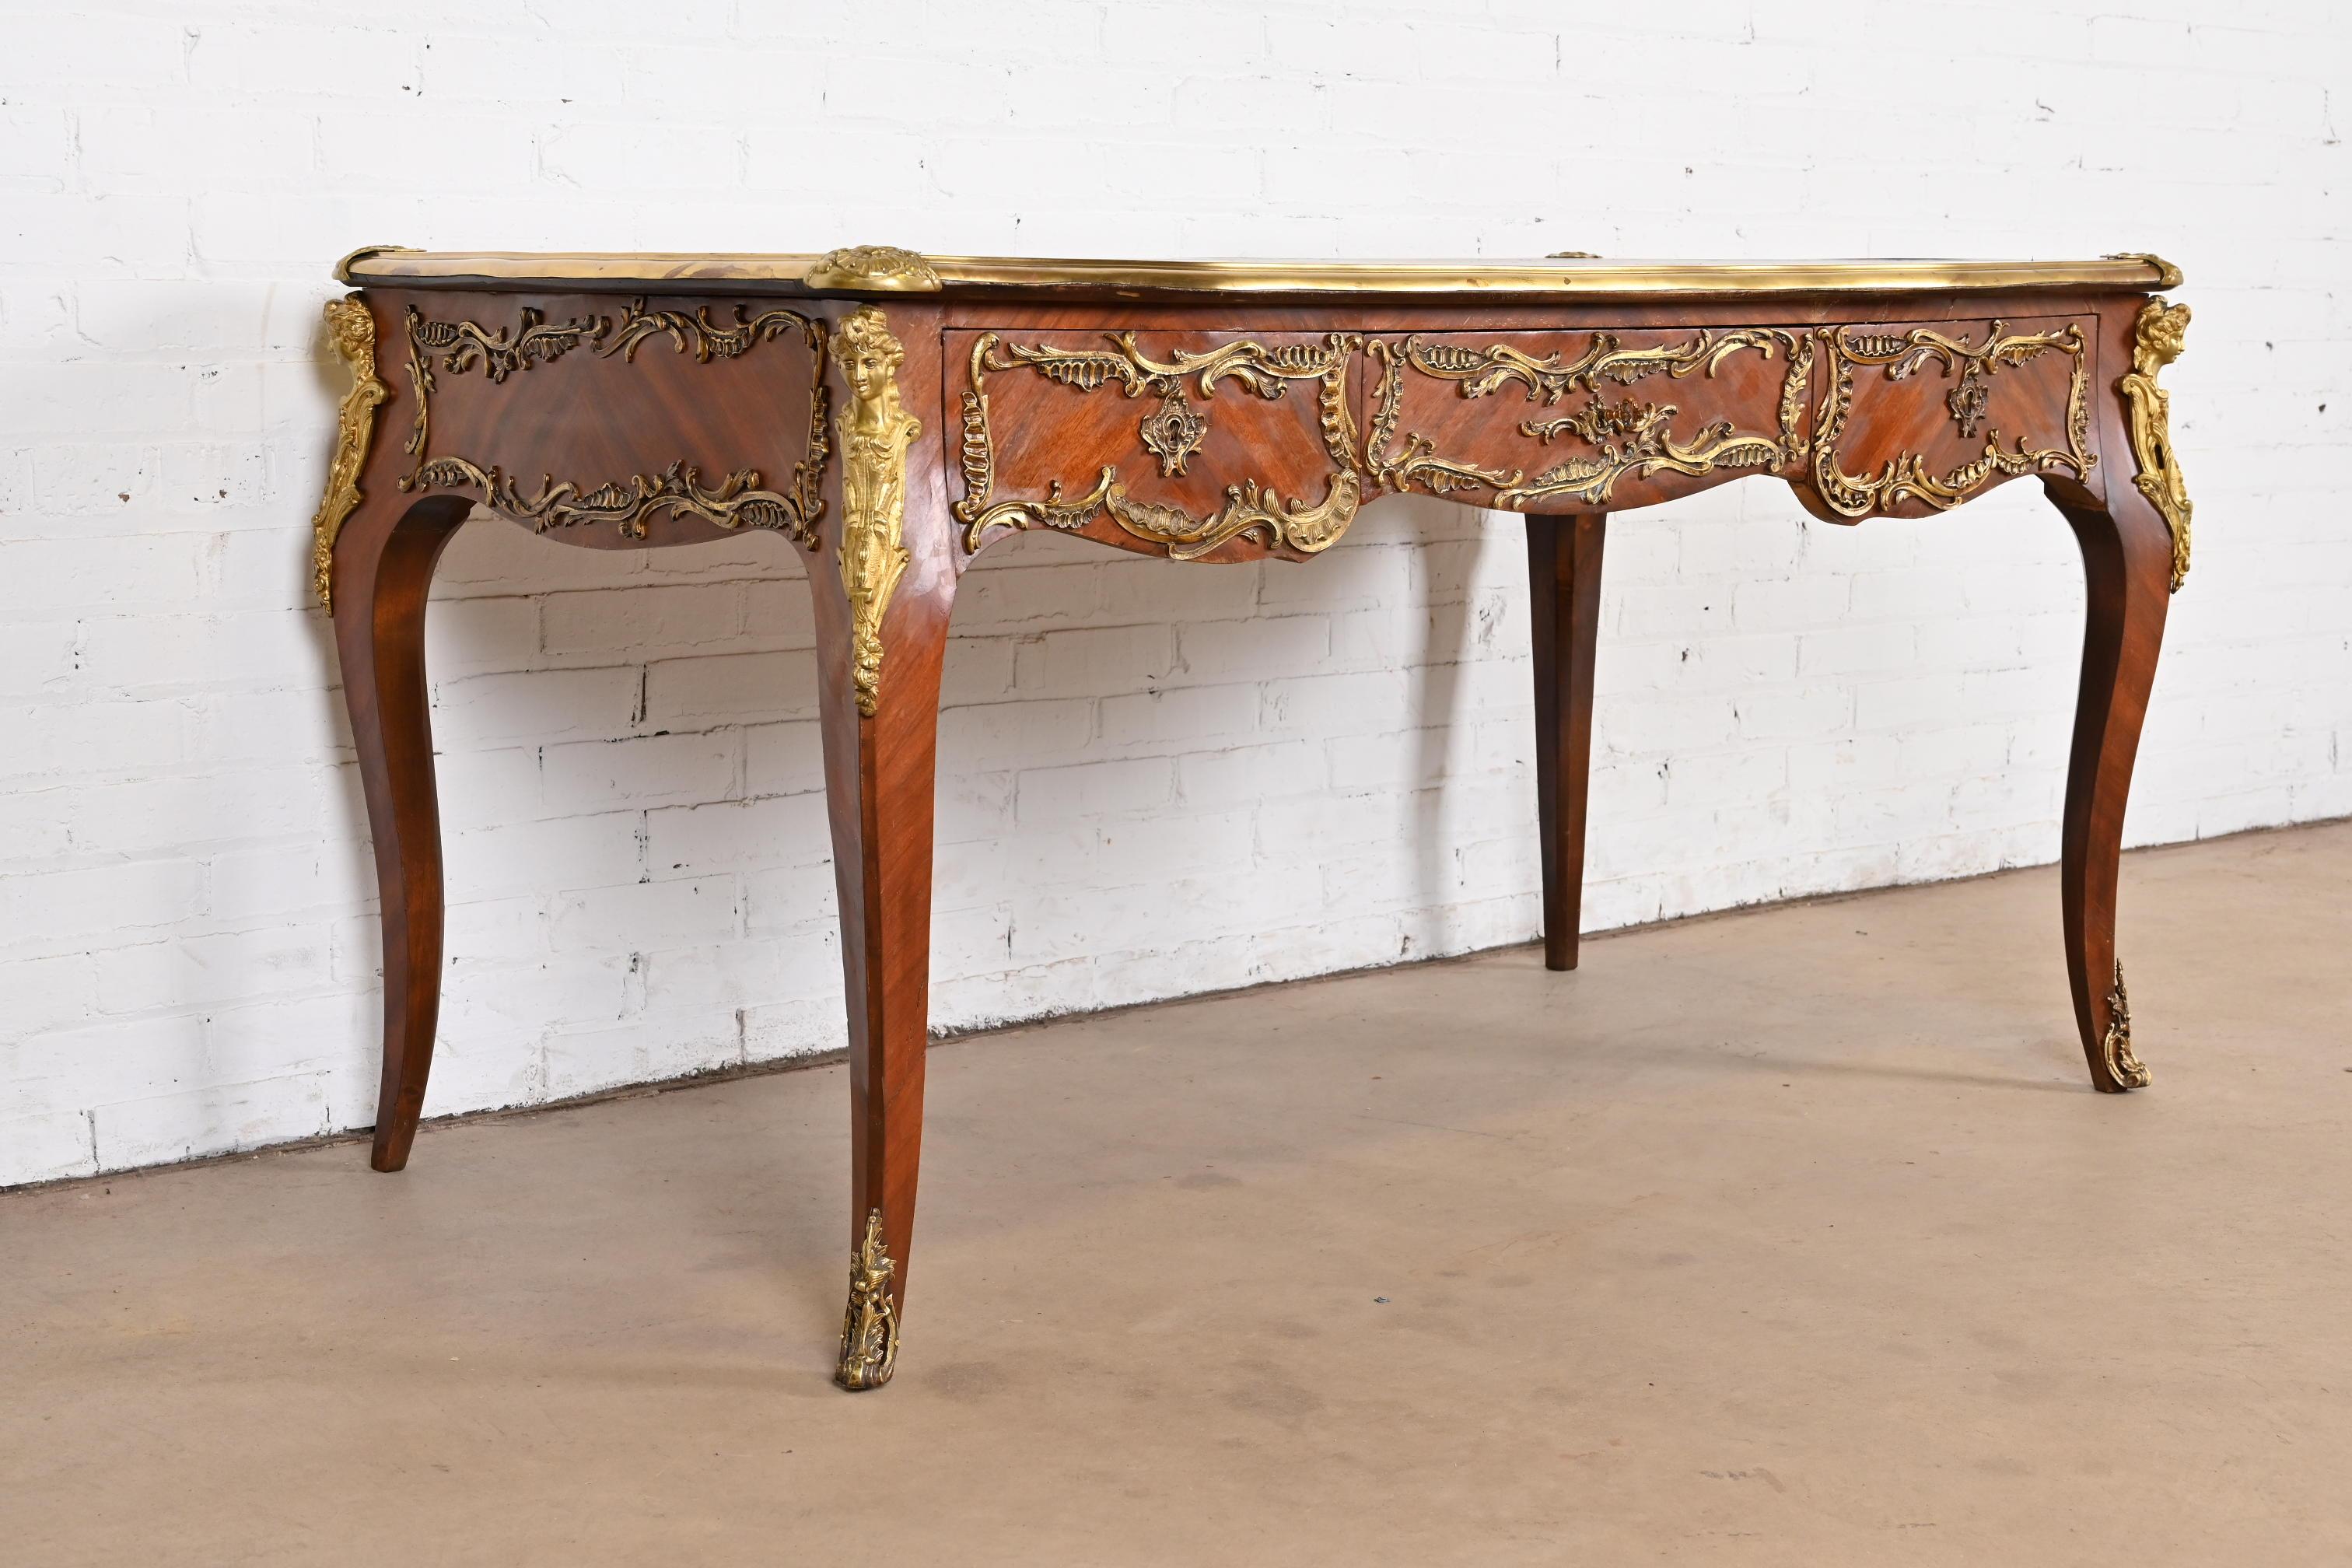 French Louis XV Kingwood Leather Top Bureau Plat Desk With Gilt Bronze Ormolu In Good Condition For Sale In South Bend, IN